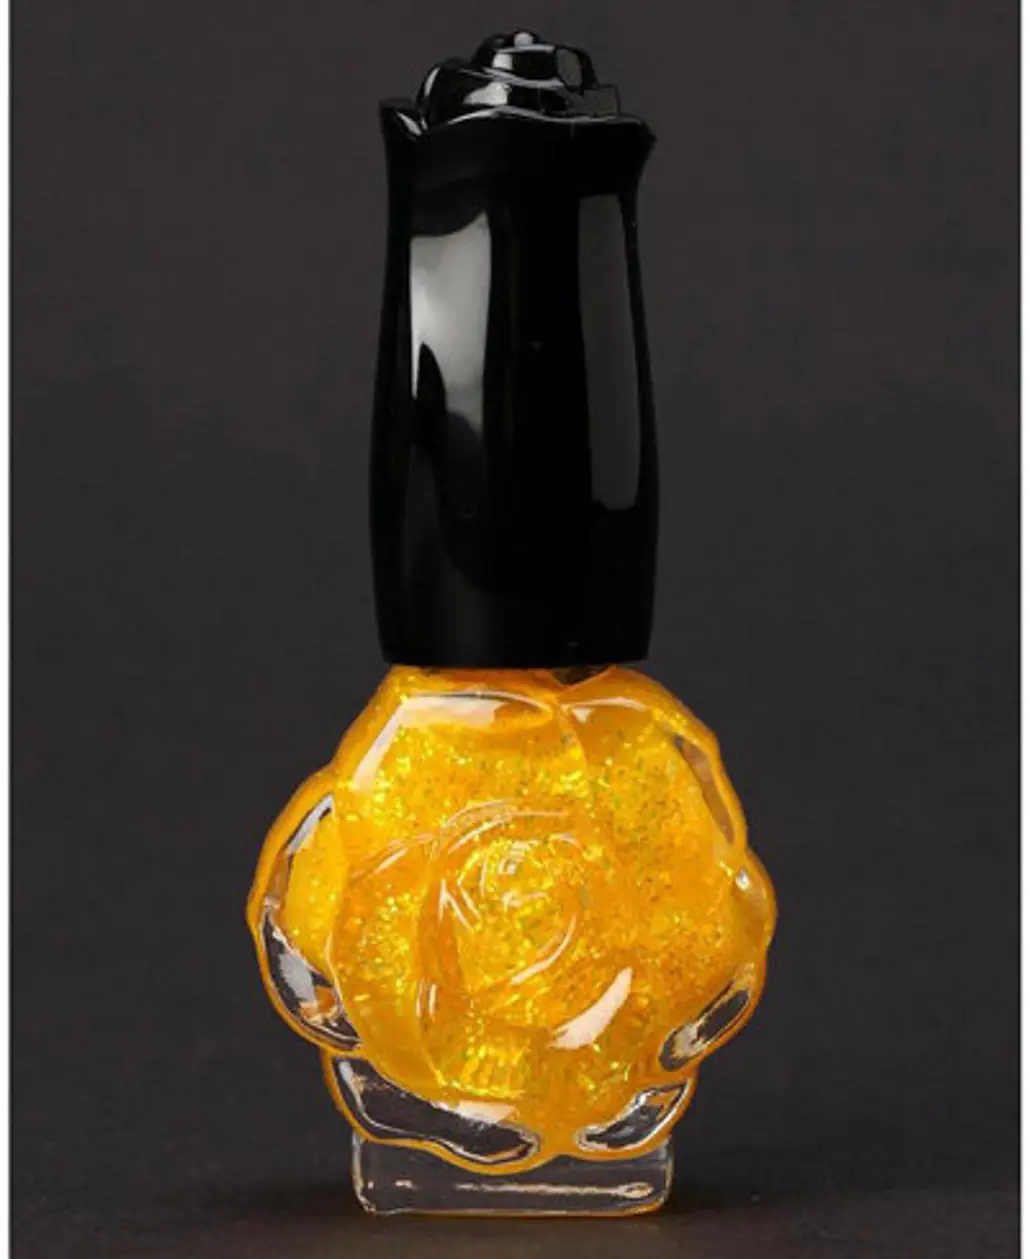 Anna Sui Large Sparkle Nail Polish in Yellow